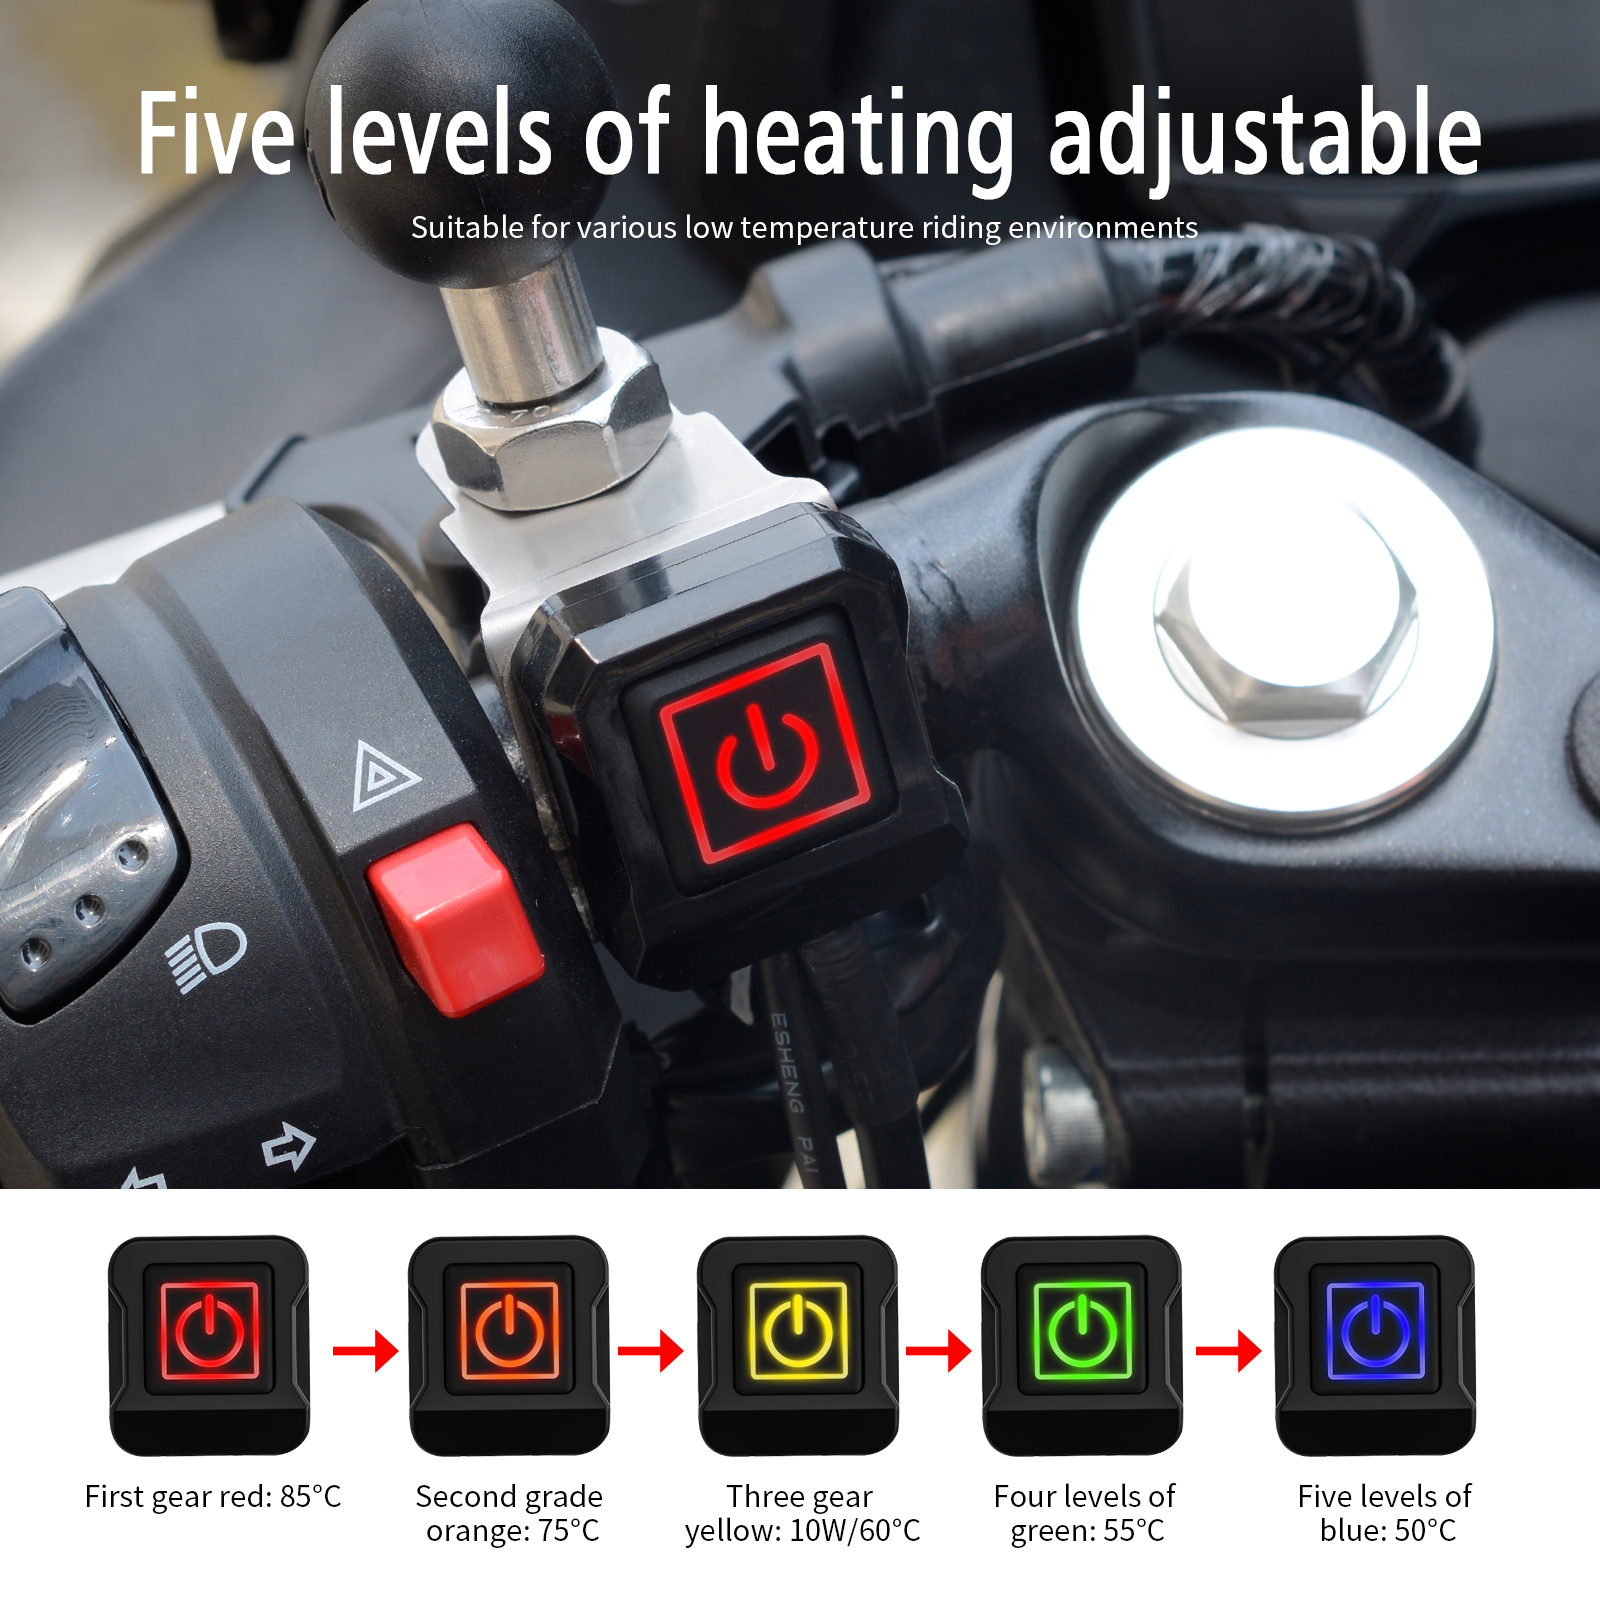 Removable Heated Grip Covers With 5 Temperature Controls For Motorcycle